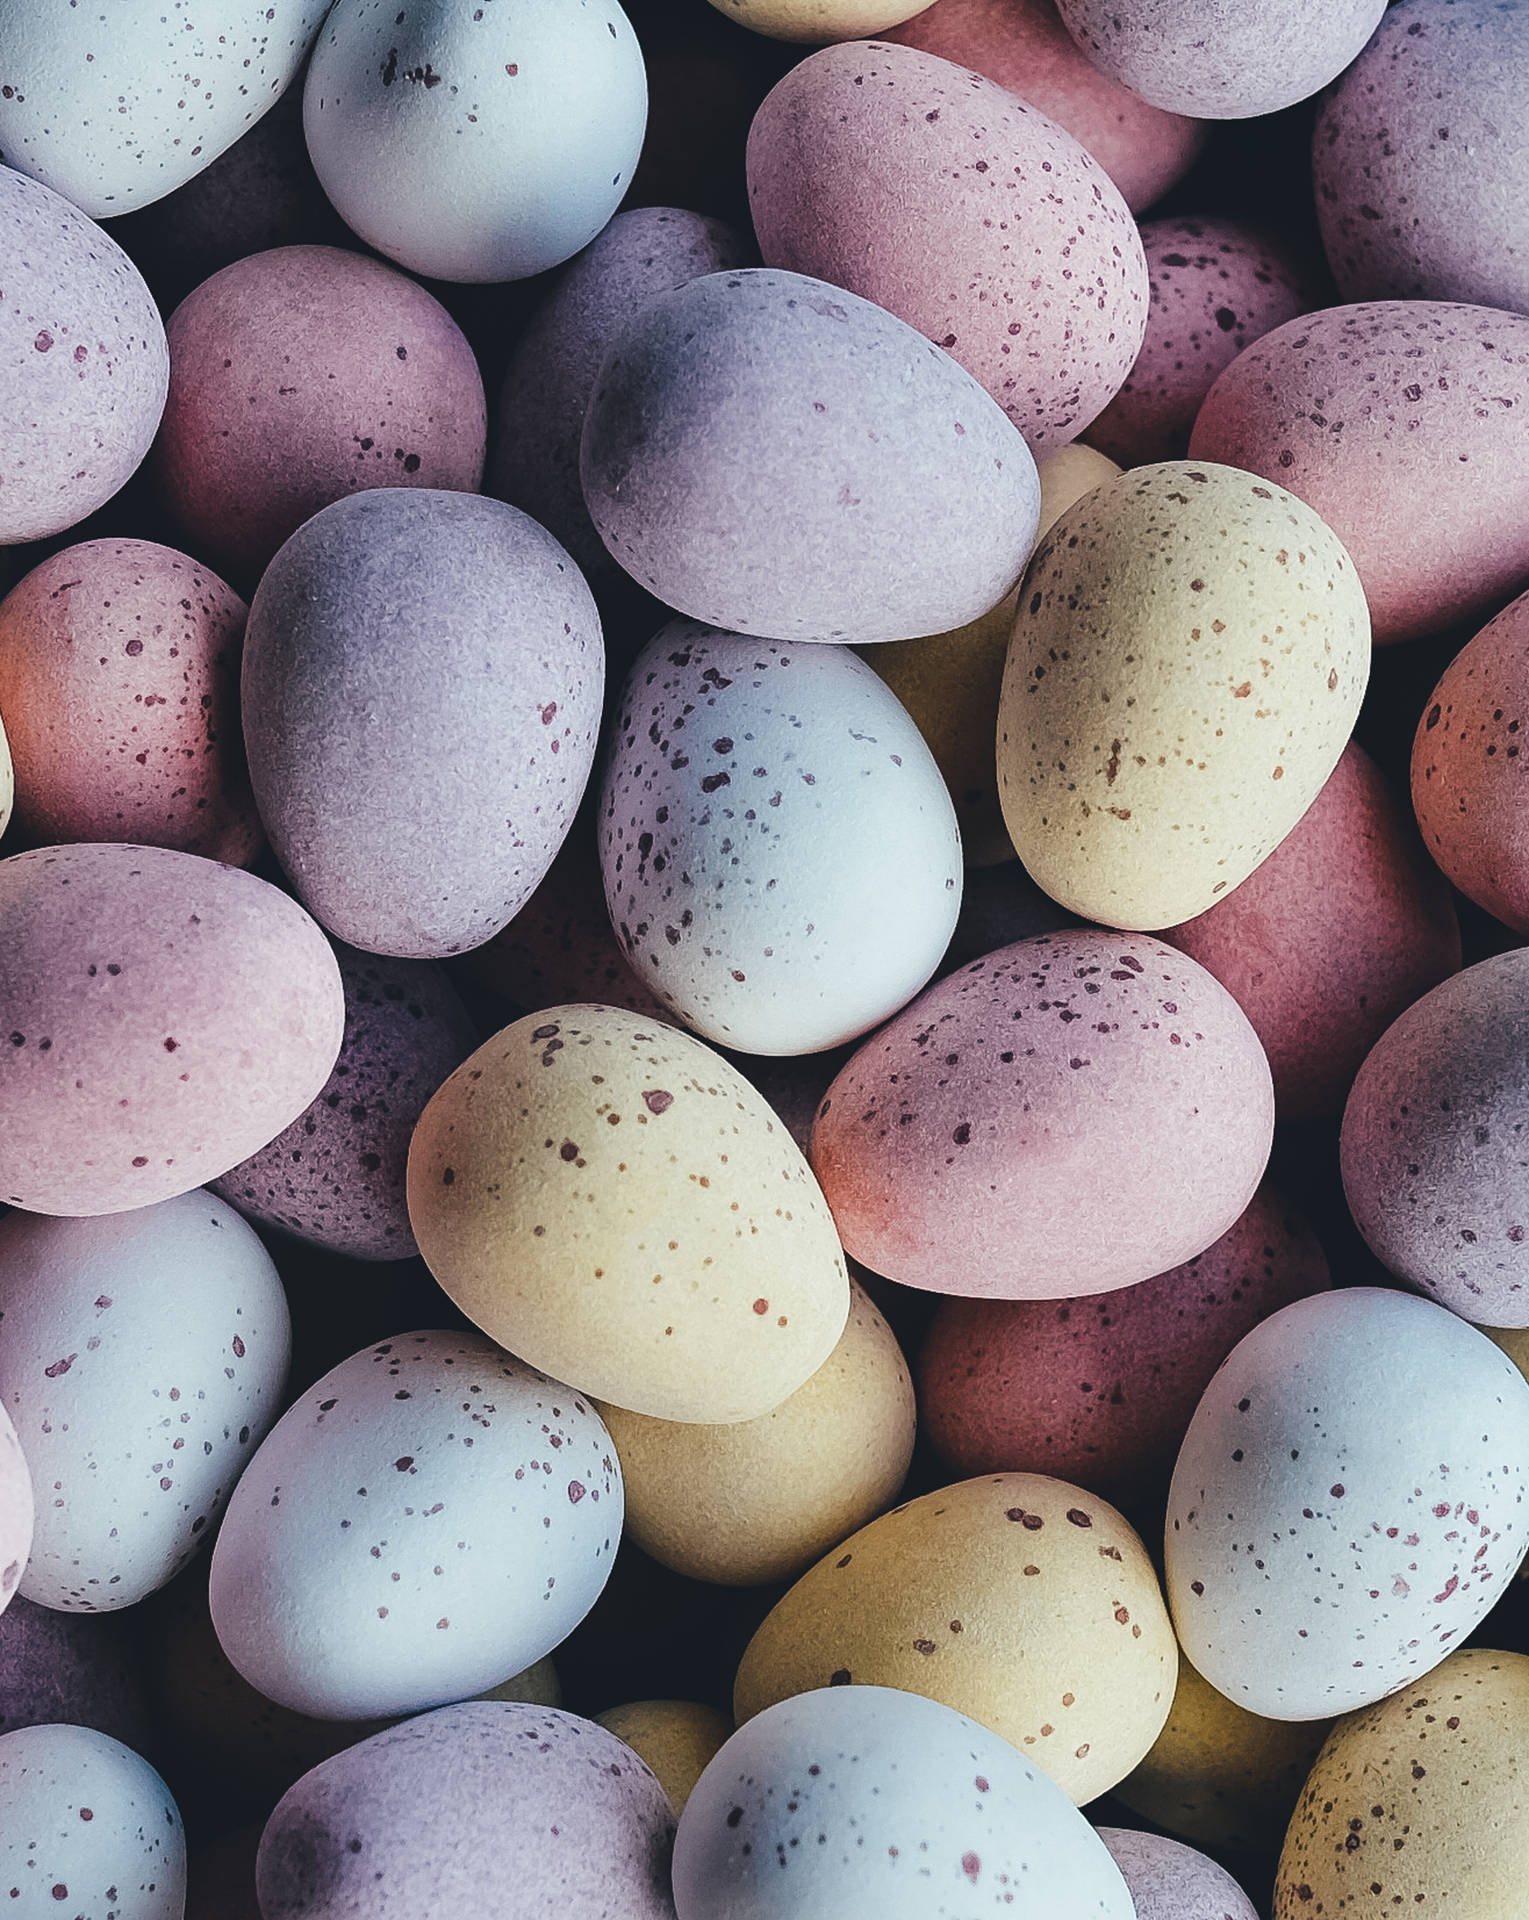 Celebrate Easter With A New Iphone Background